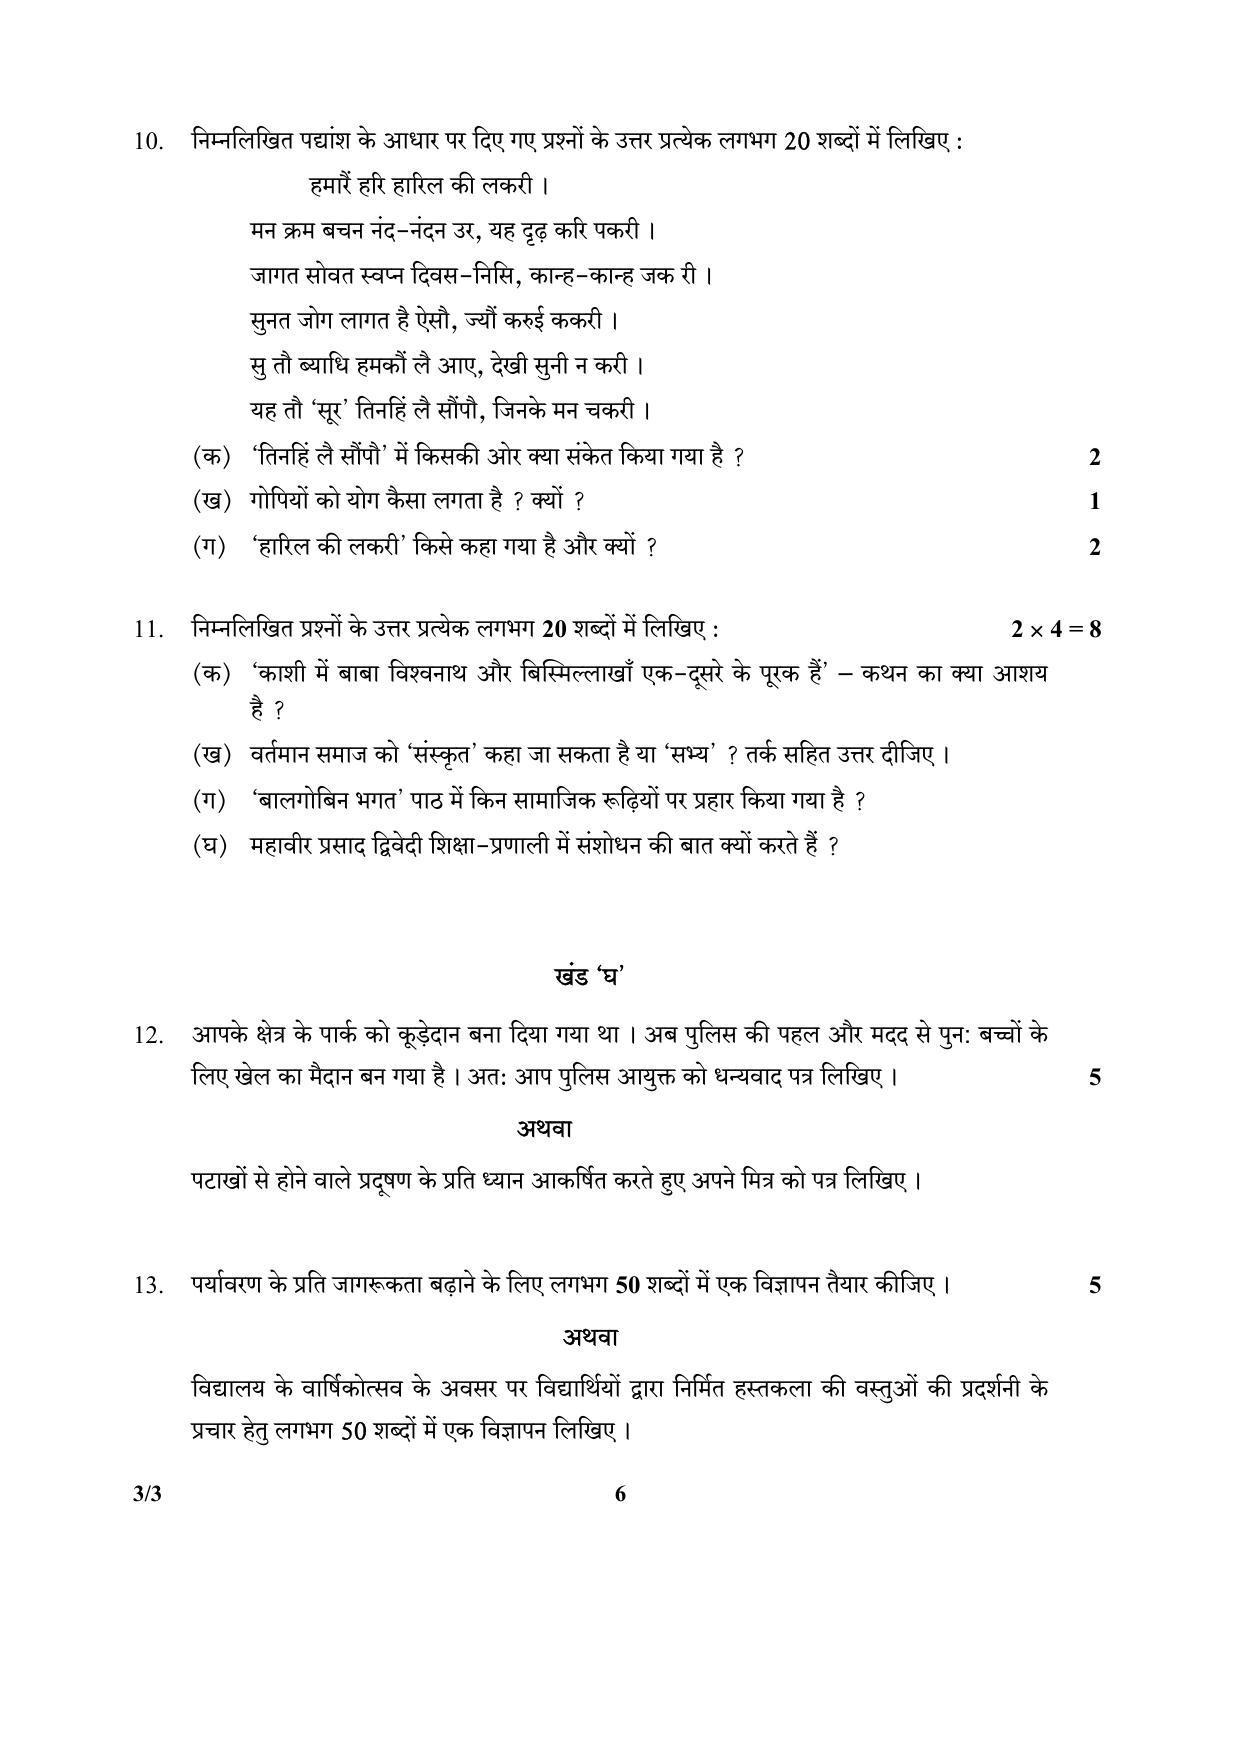 CBSE Class 10 3-3_Hindi SET-3 2018 Question Paper - Page 6